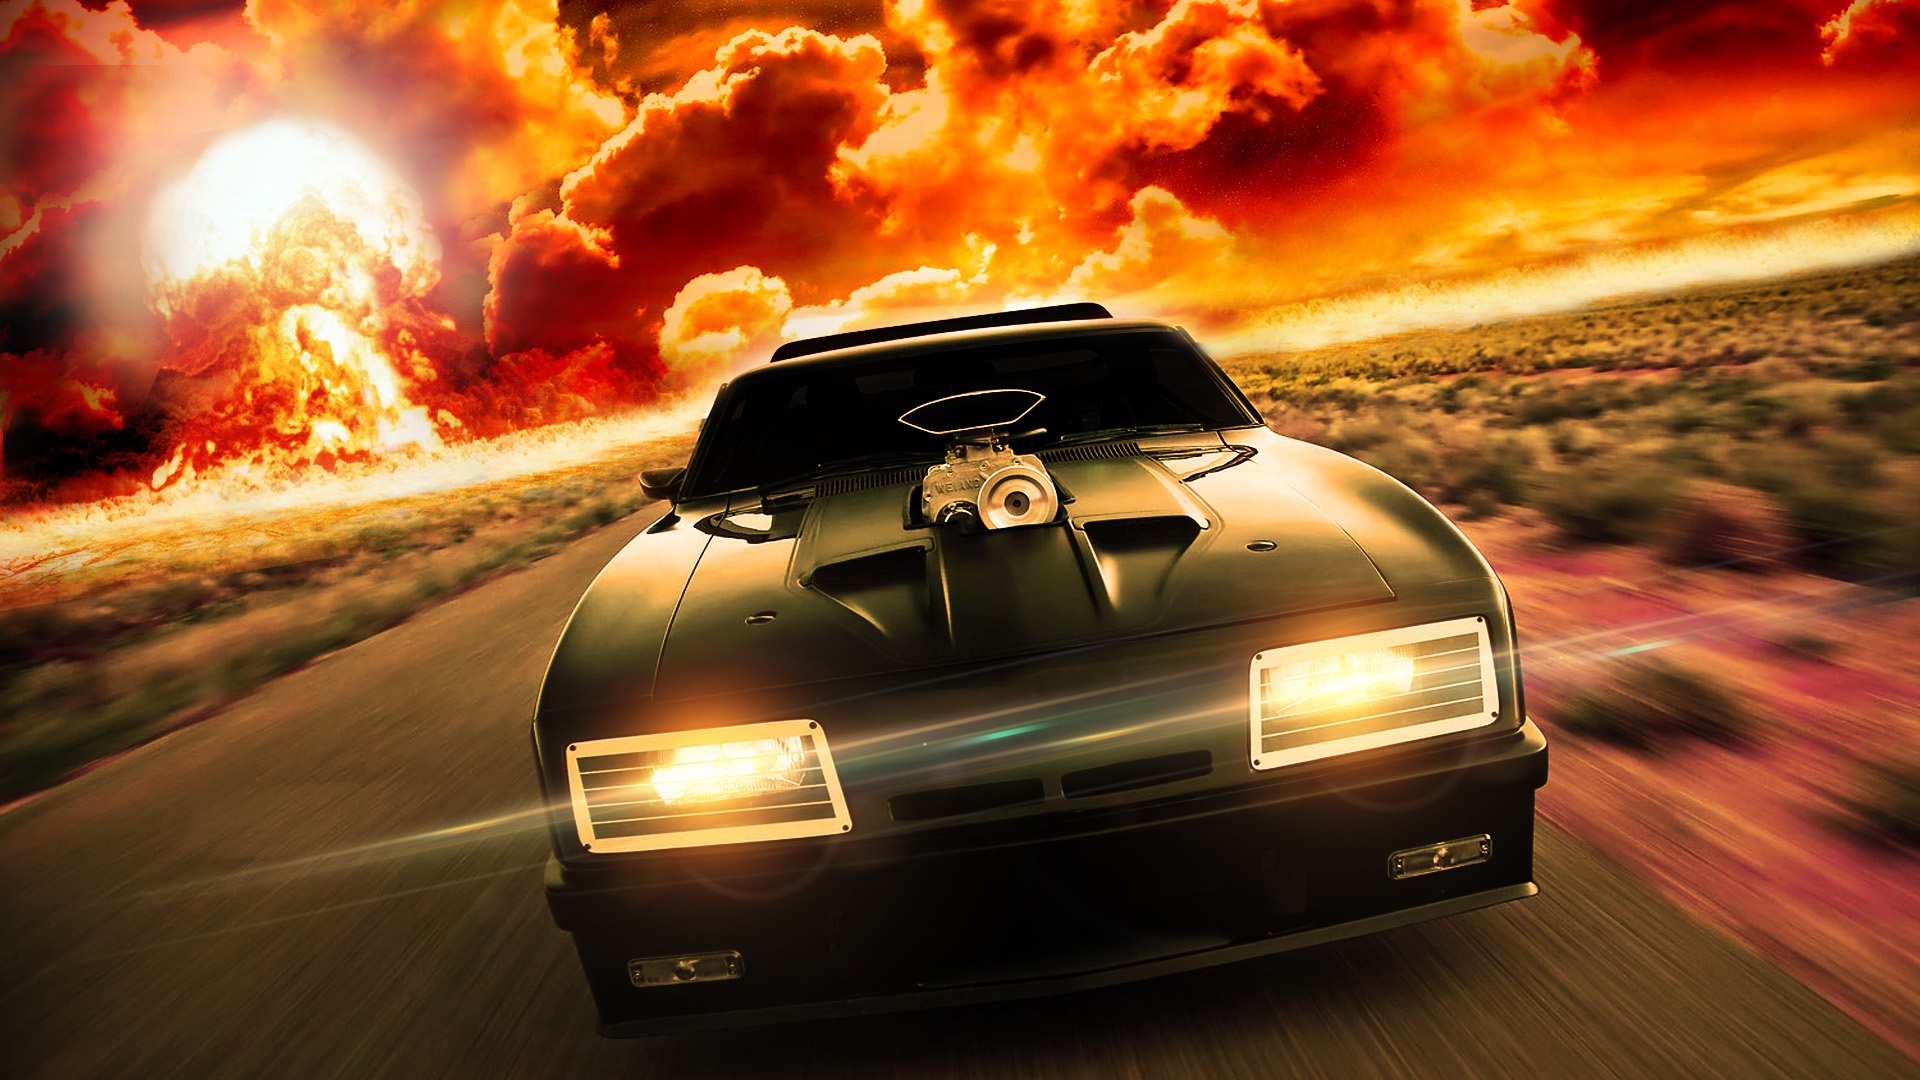 Wallpapers mad Max an explosion Ford Falcon Pursuit Special on the desktop